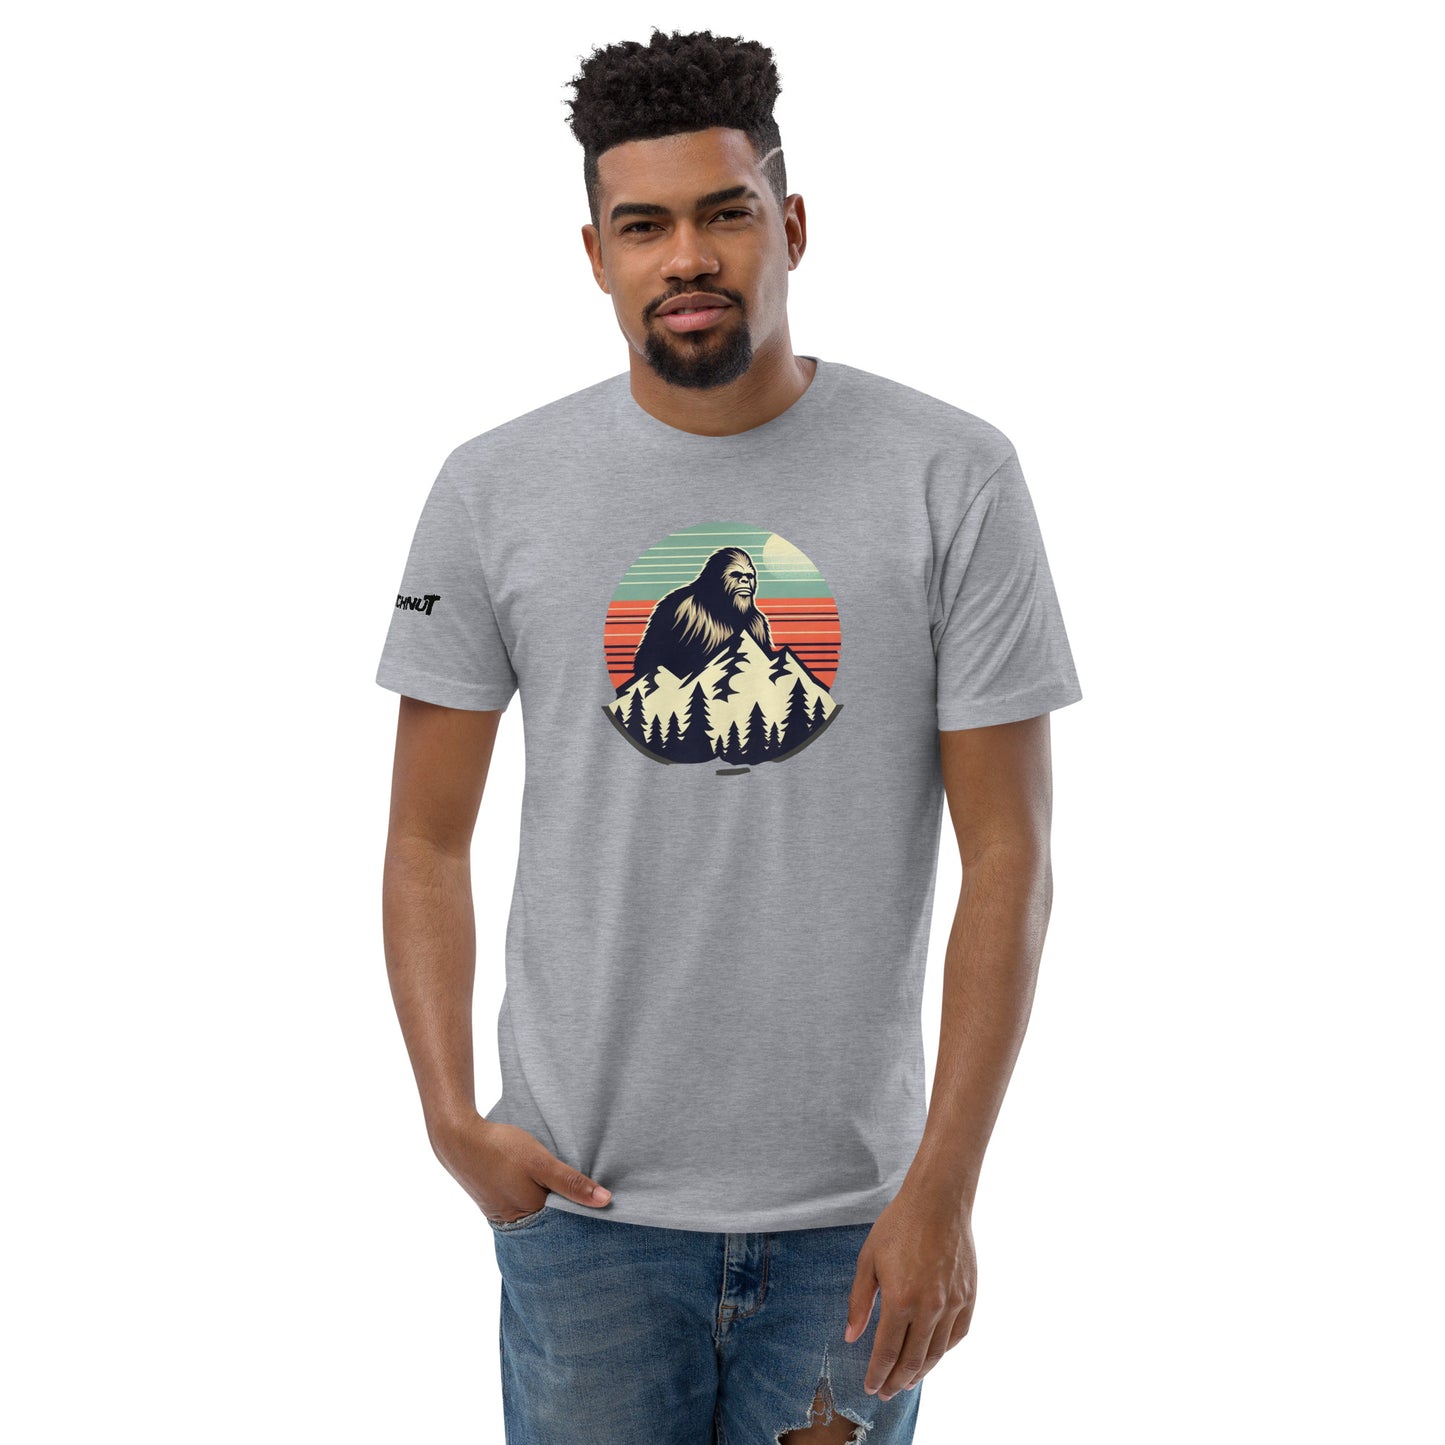 Look out Short Sleeve T-shirt